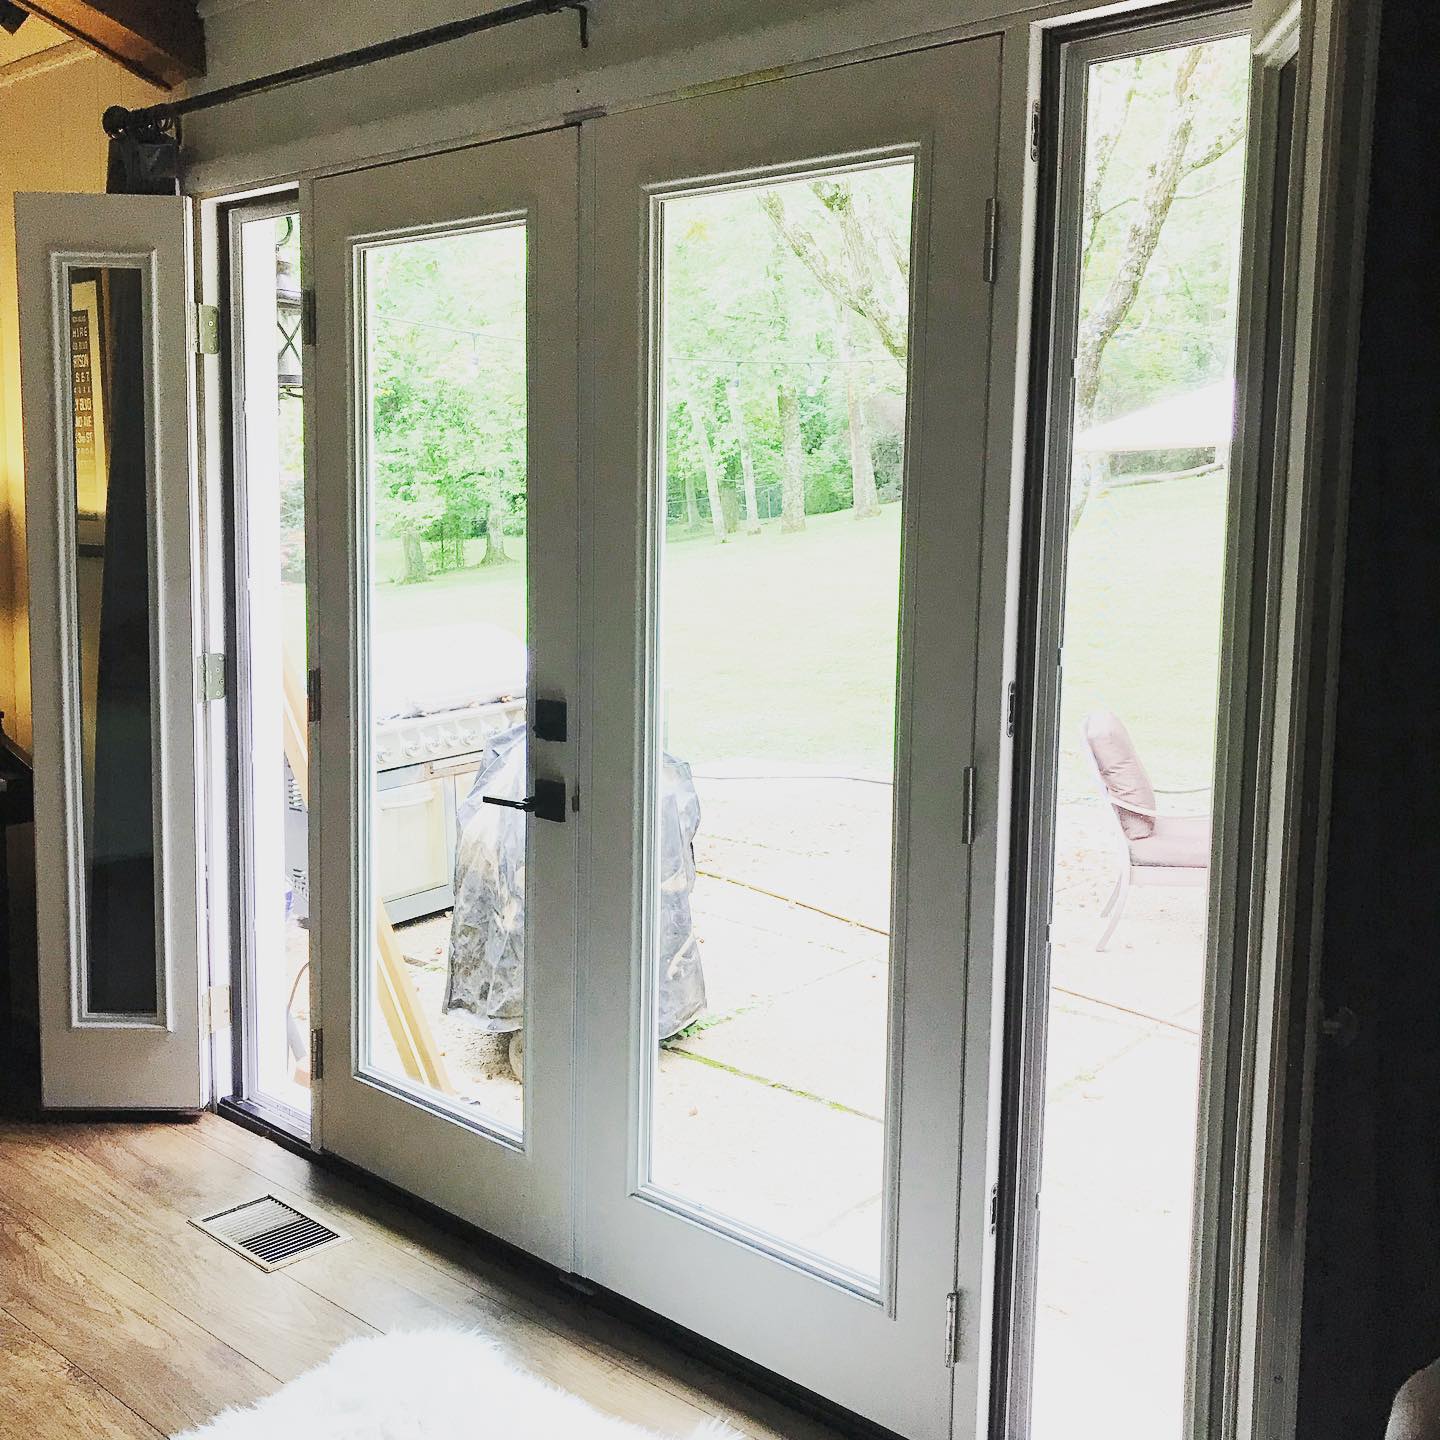 White double hinged patio doors with full length glass panes leading to a patio.